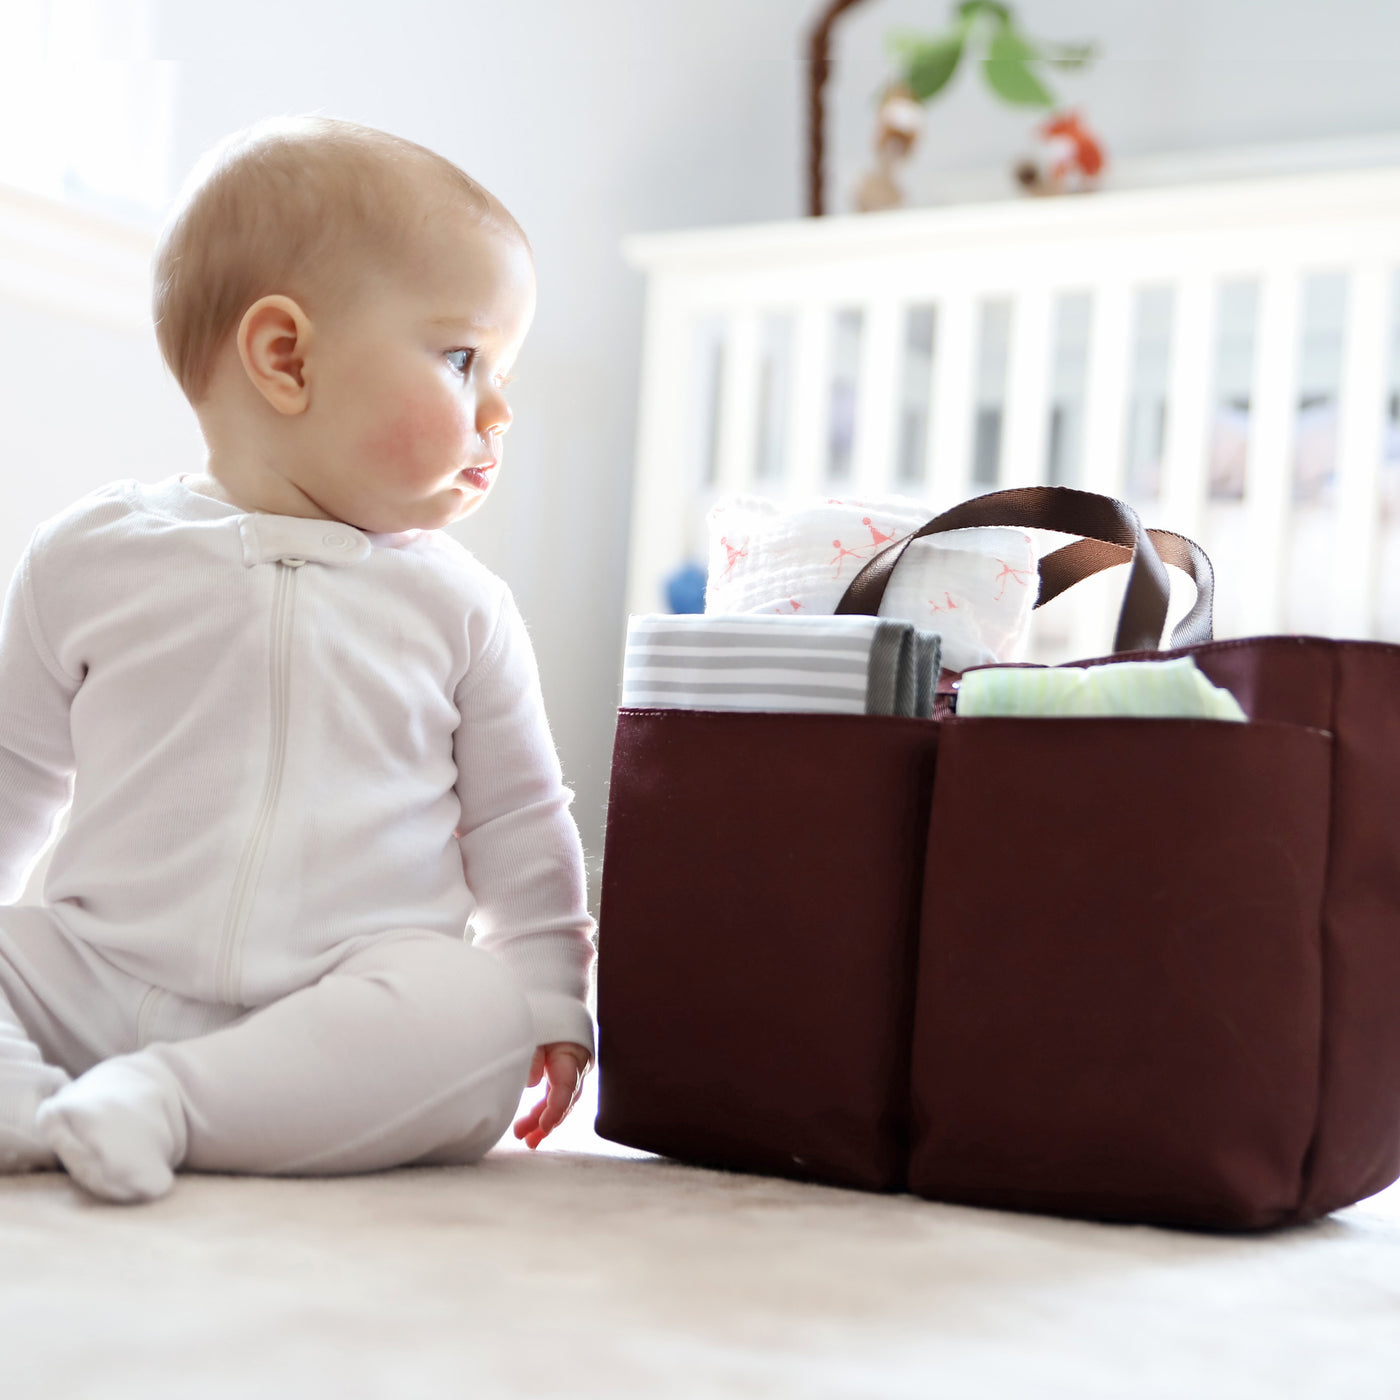 The Experienced Mom's Guide to Packing a Diaper Bag | Munchkin